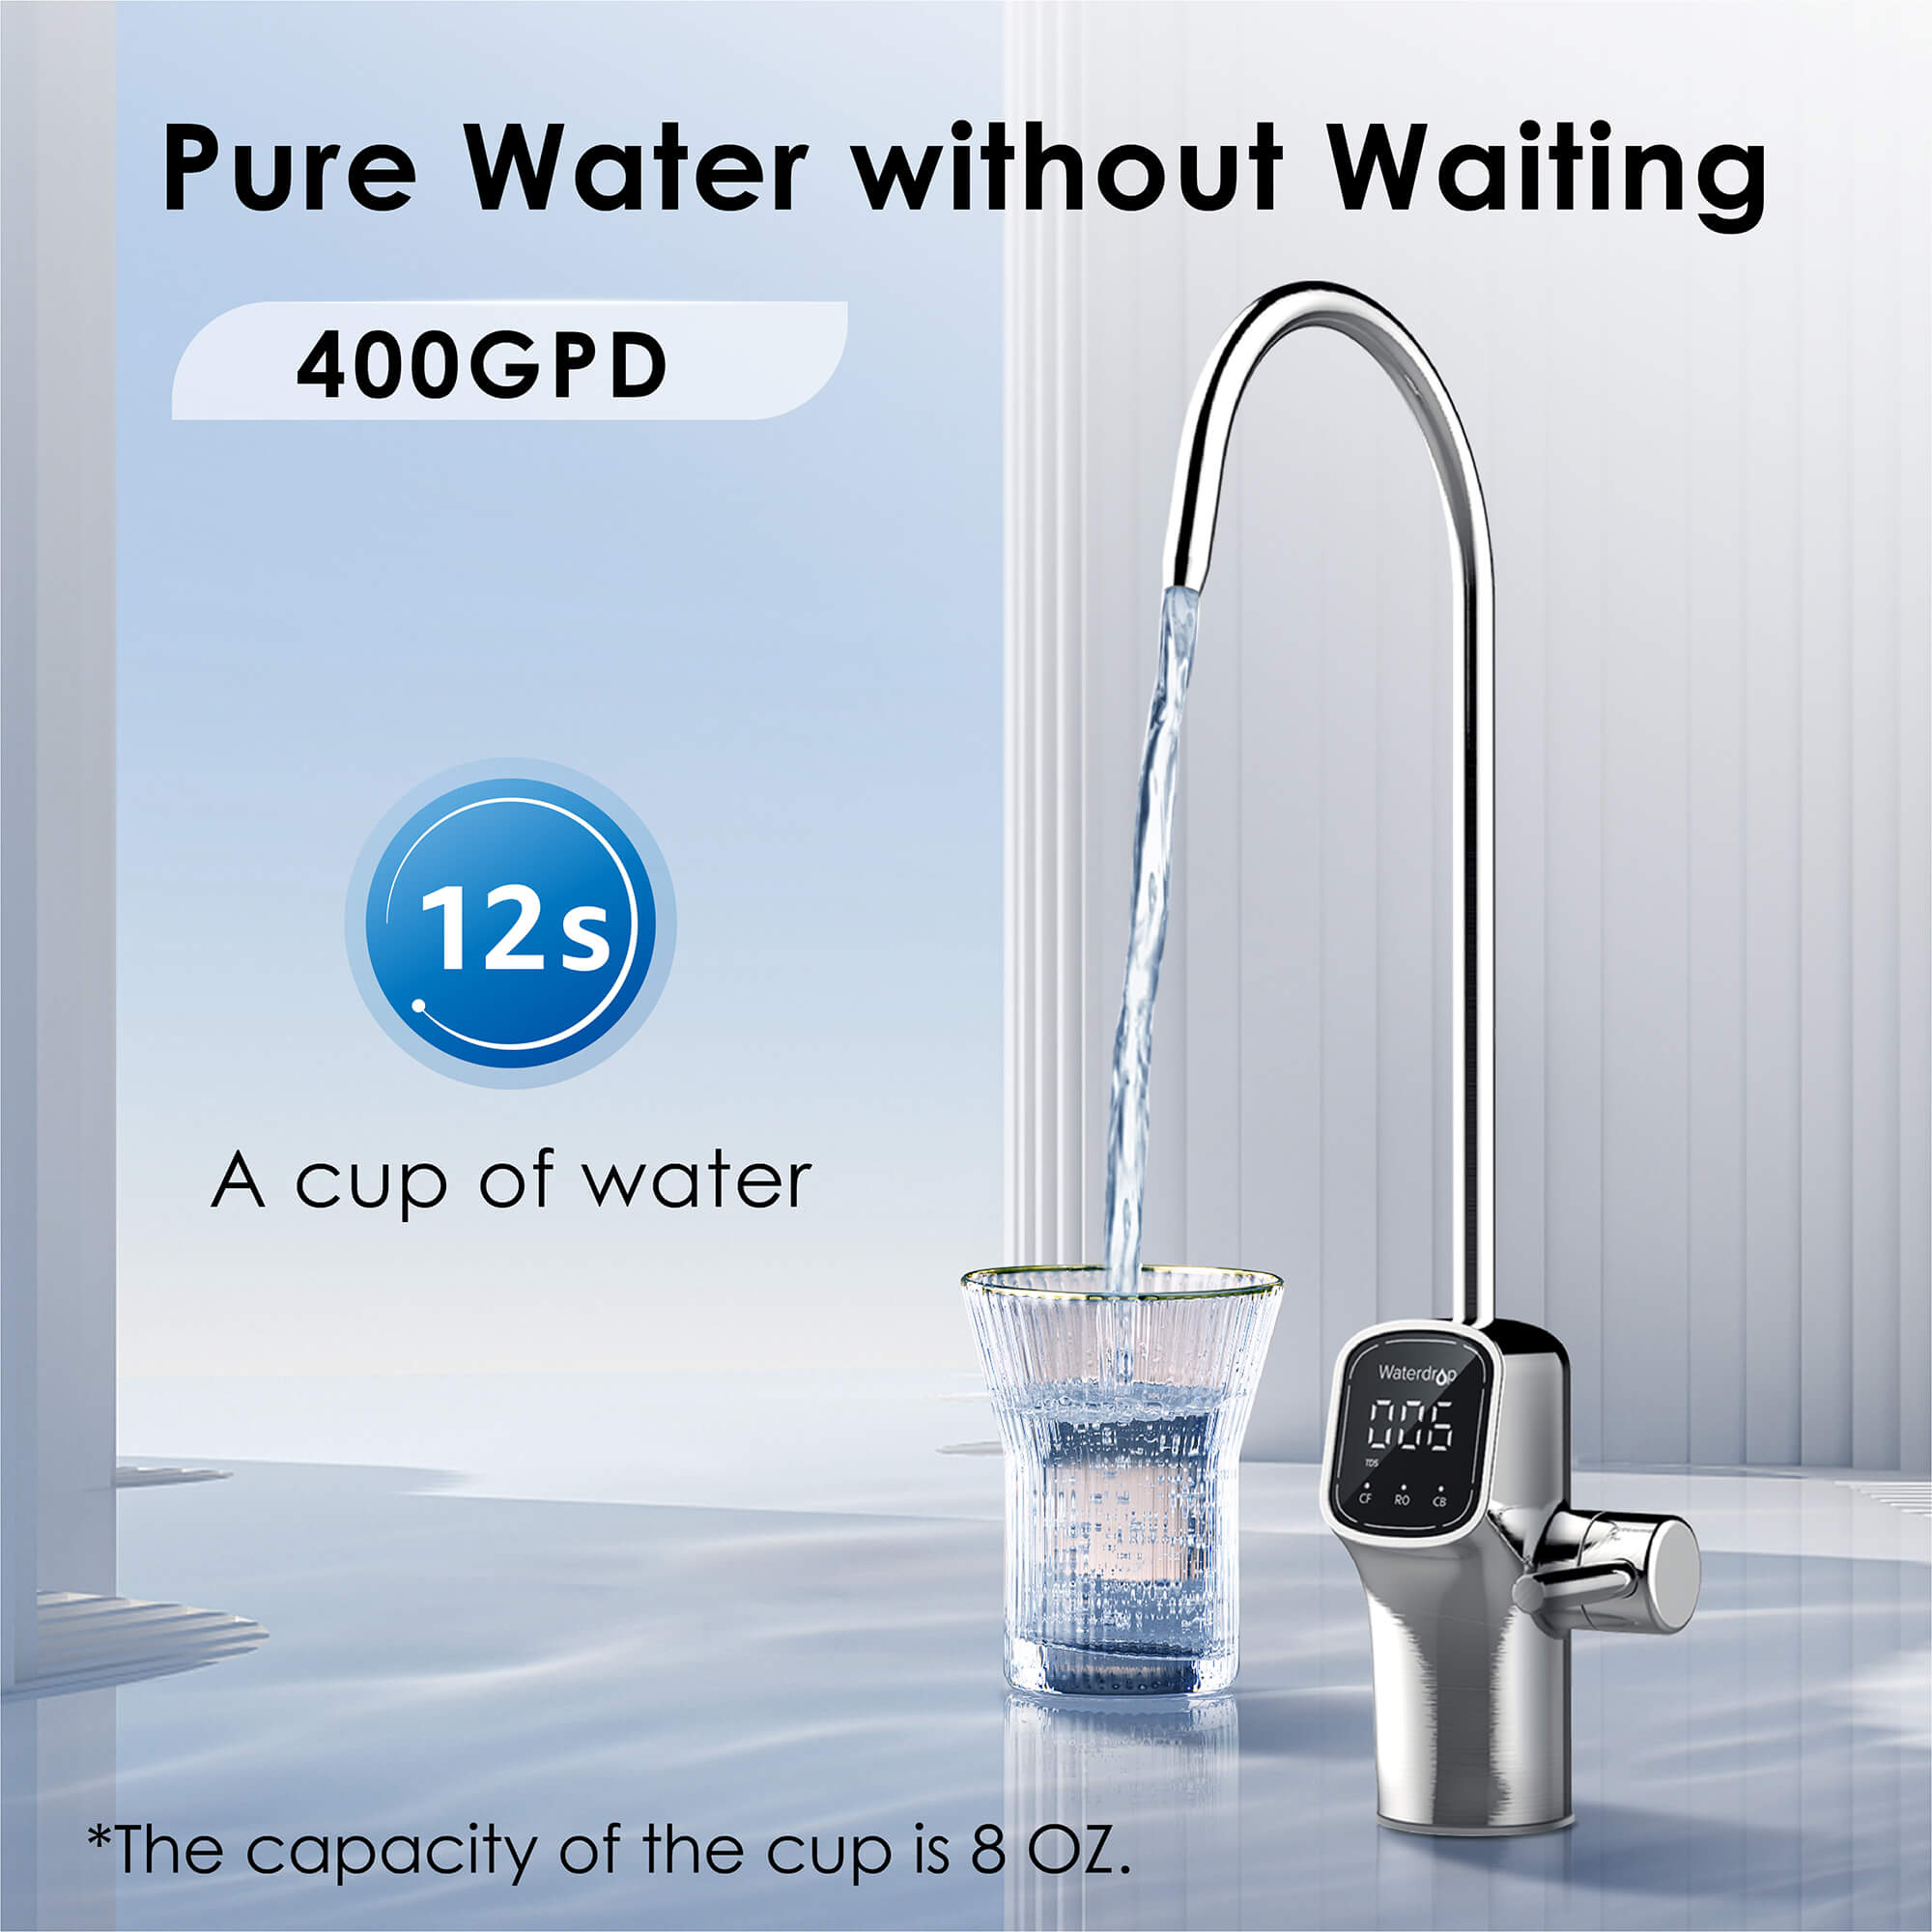 Pure Water without Waiting